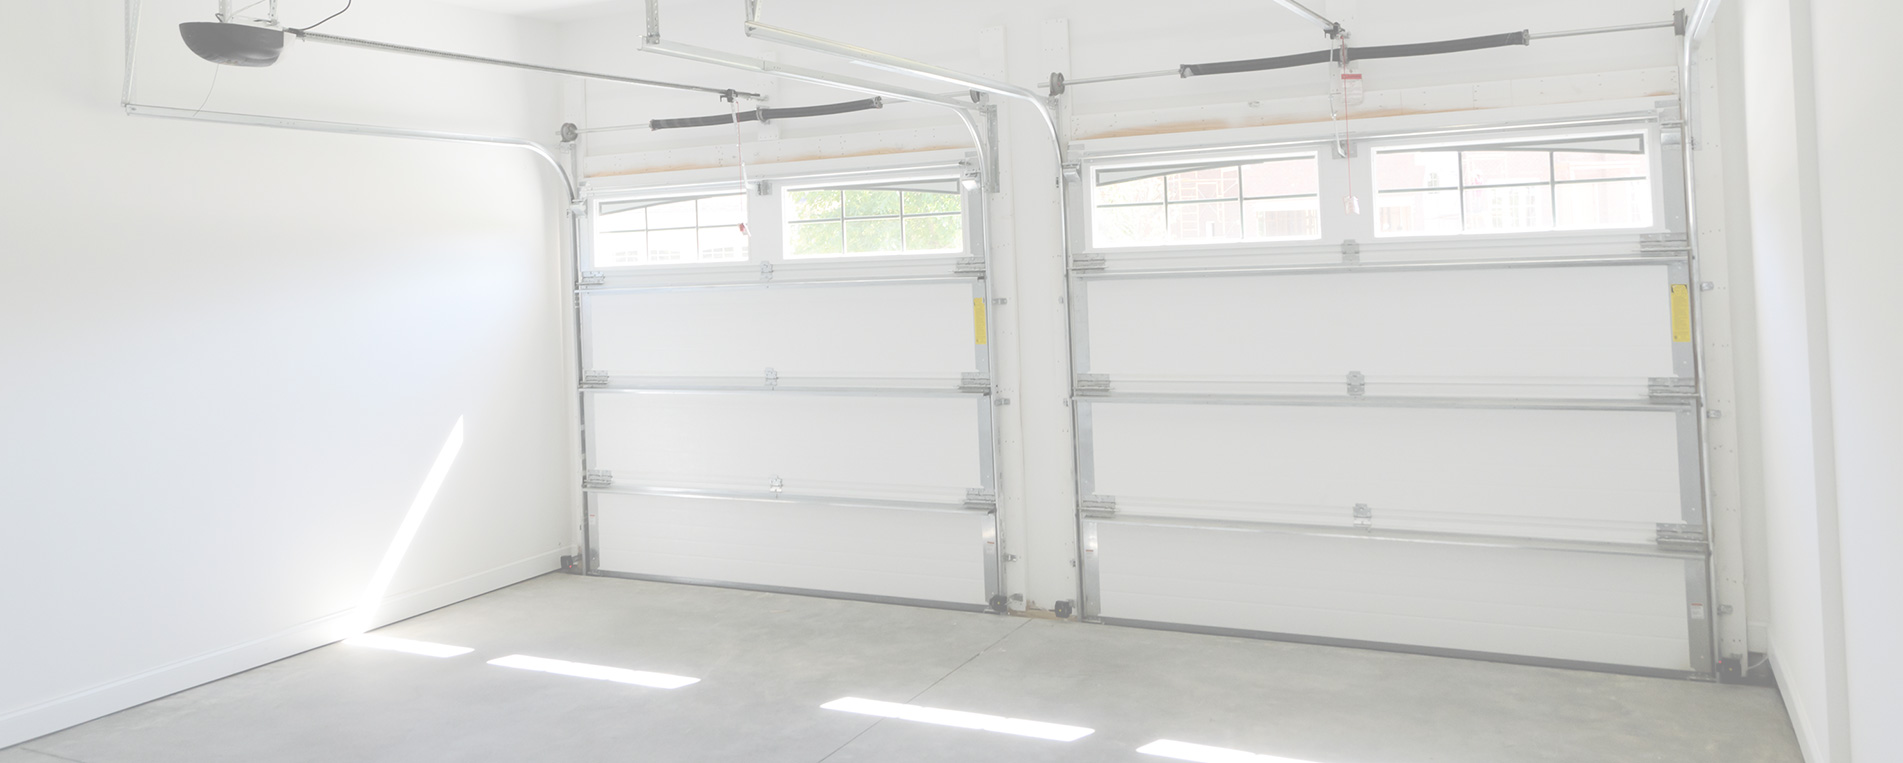 Suggestions About Garage Doors